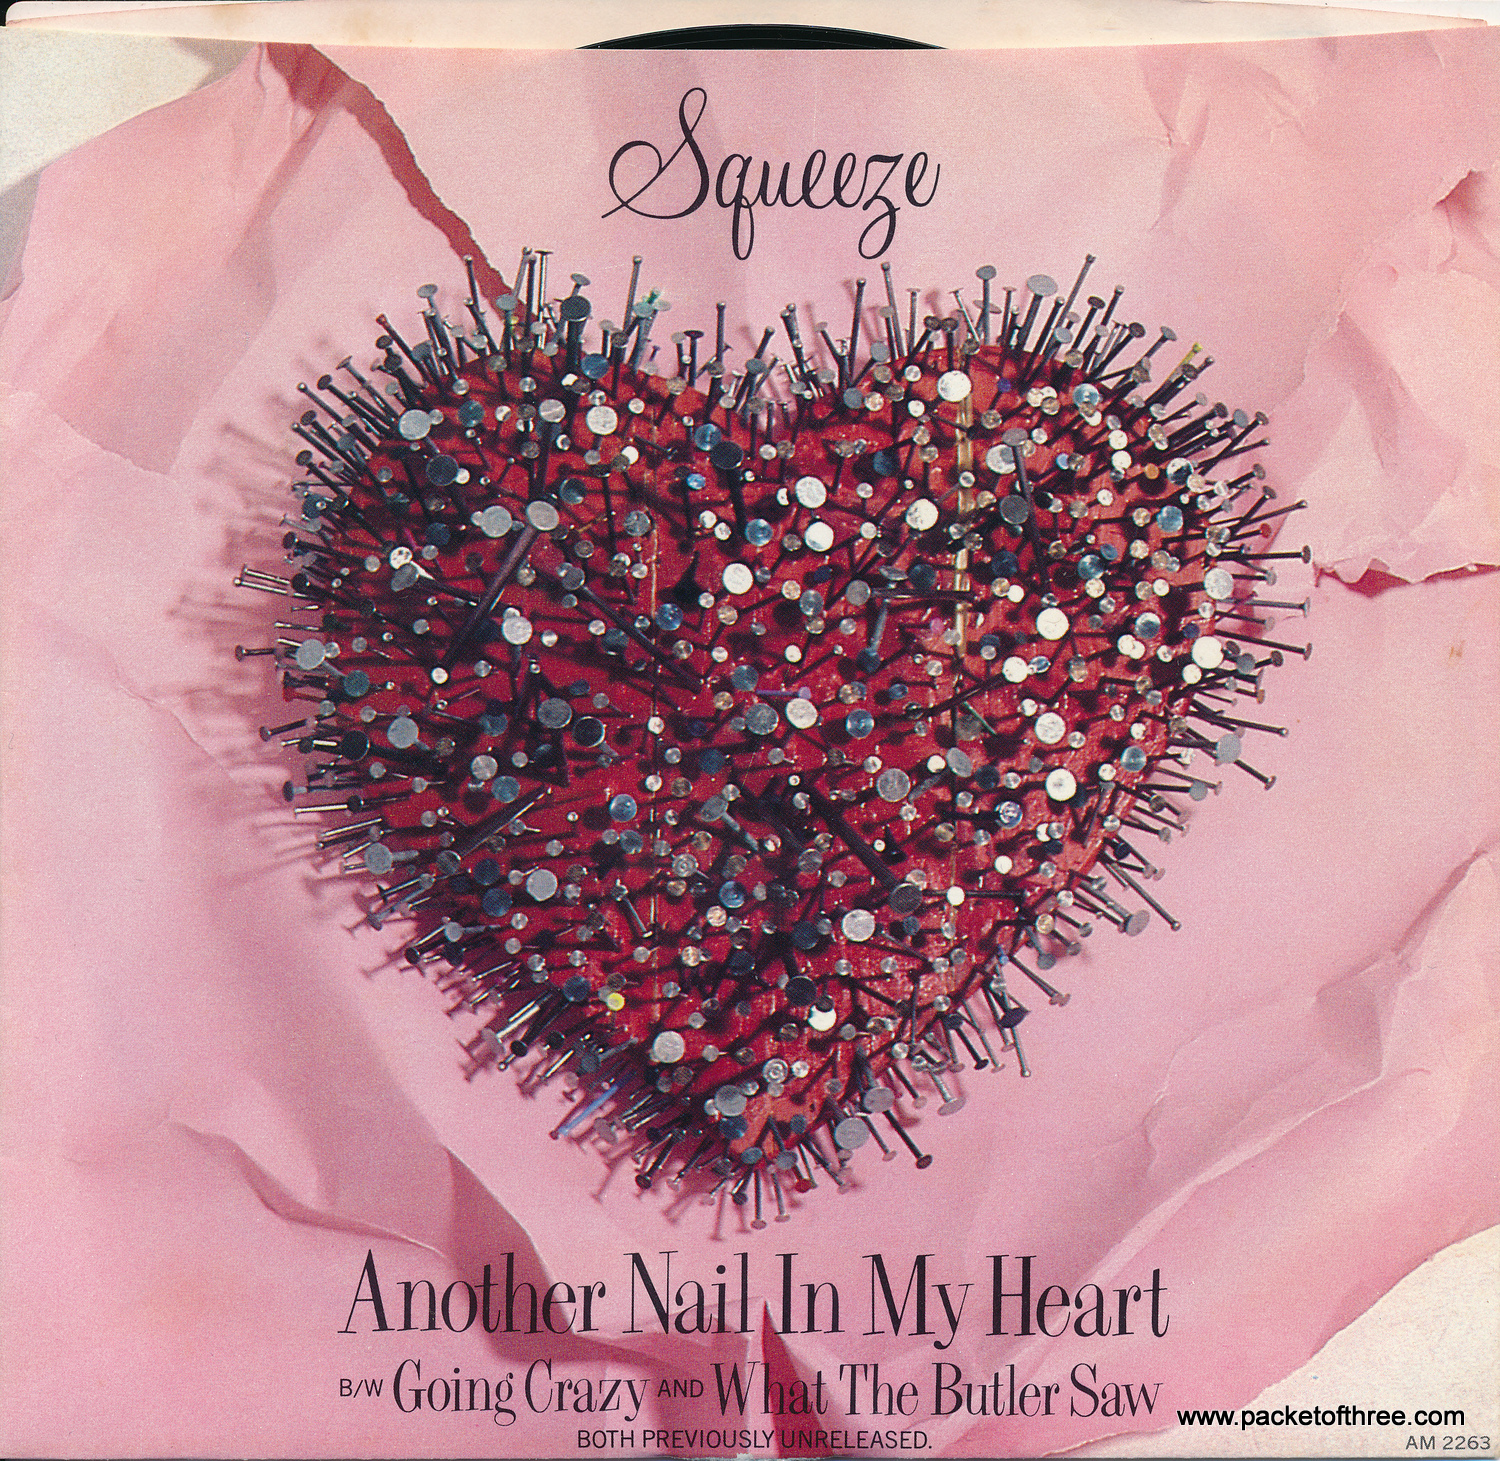 Another Nail In My Heart - USA - 7" - Picture Sleeve